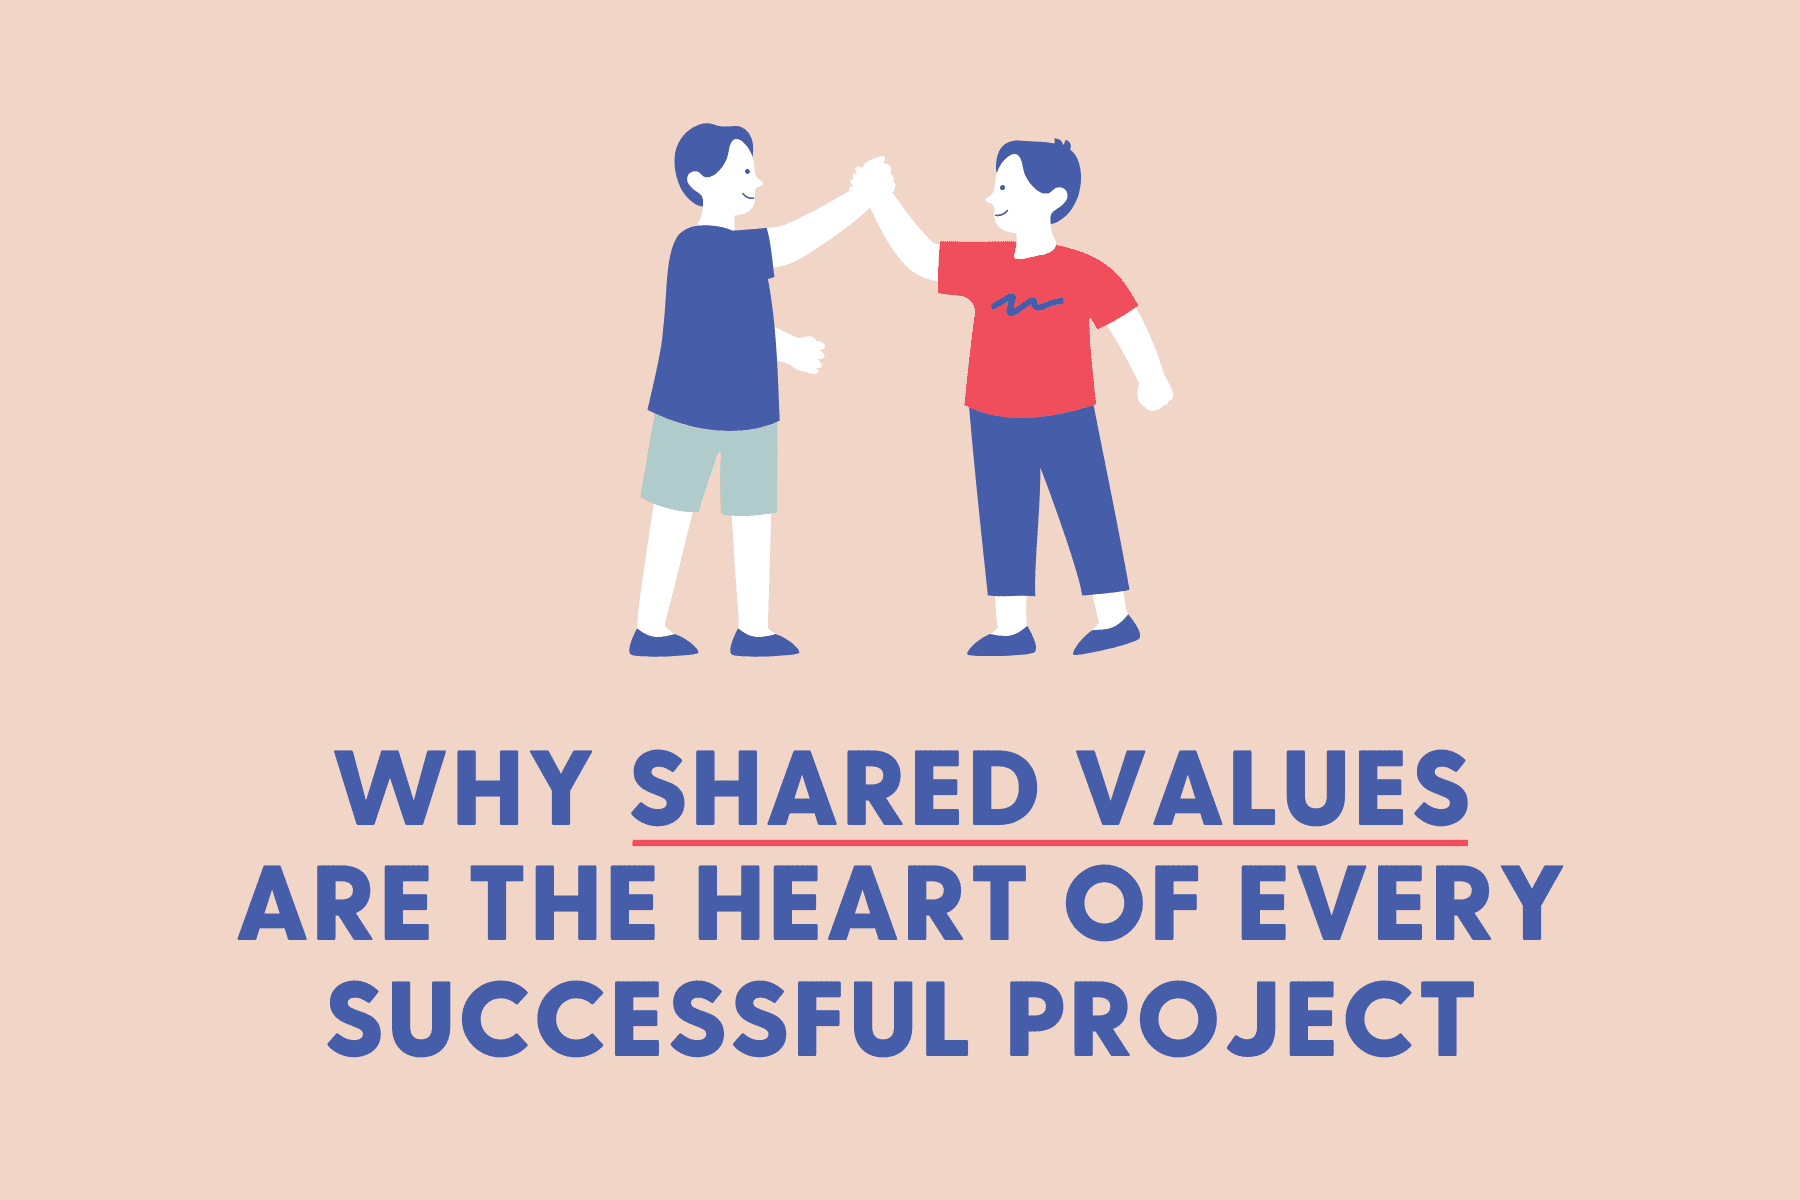 A light pink background with a cartoon image of two people high fiving, the text reads "why shared values are the heart of every successful project"